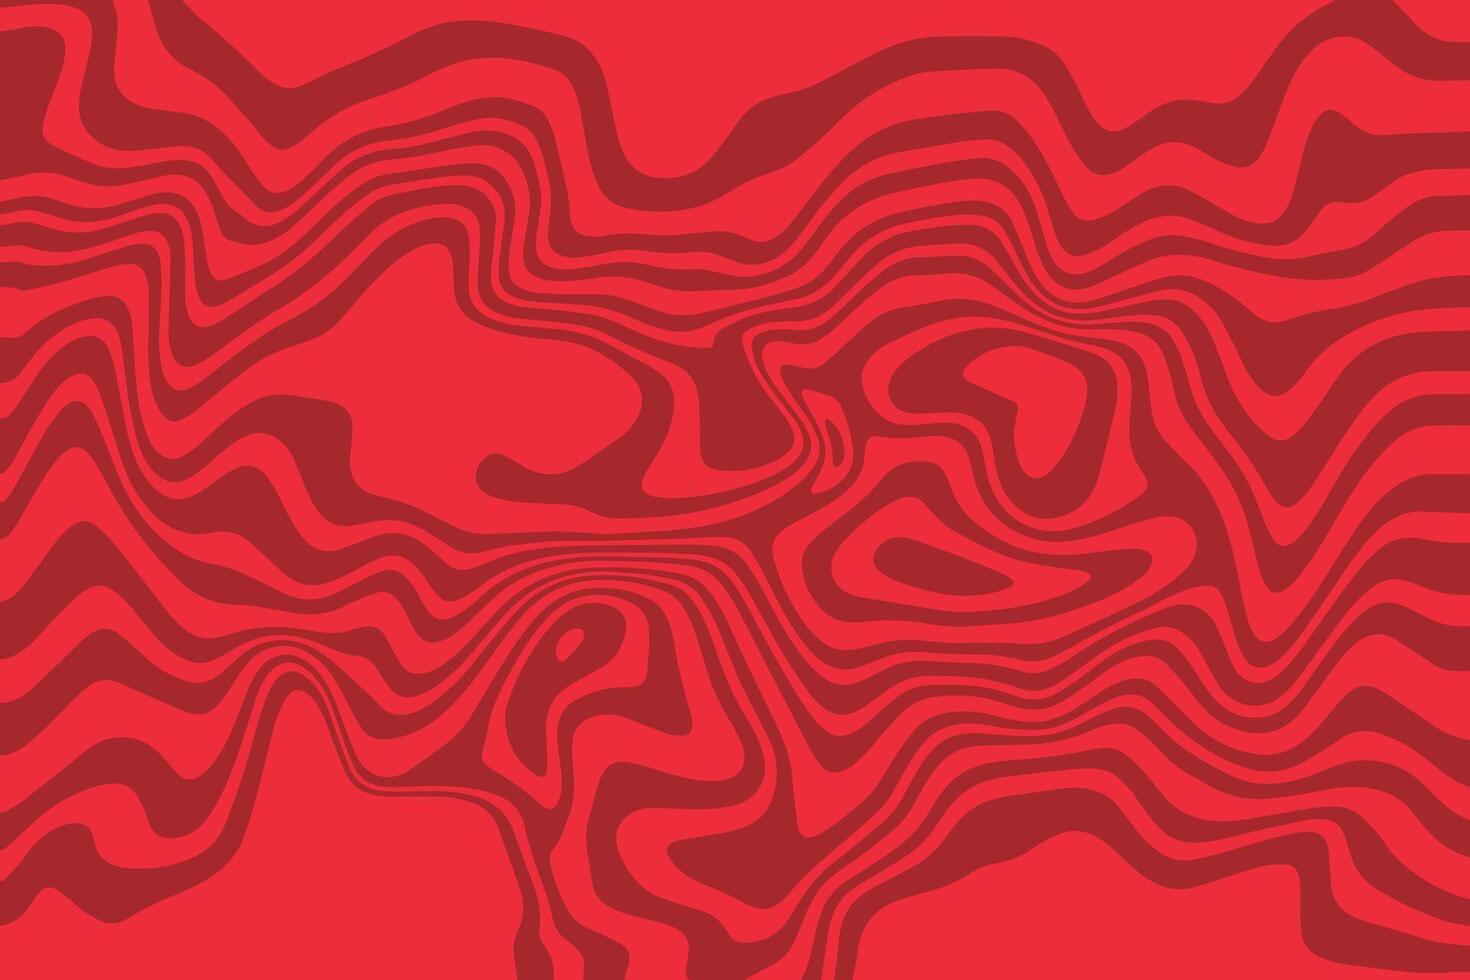 Distorted red stripes abstract background vector